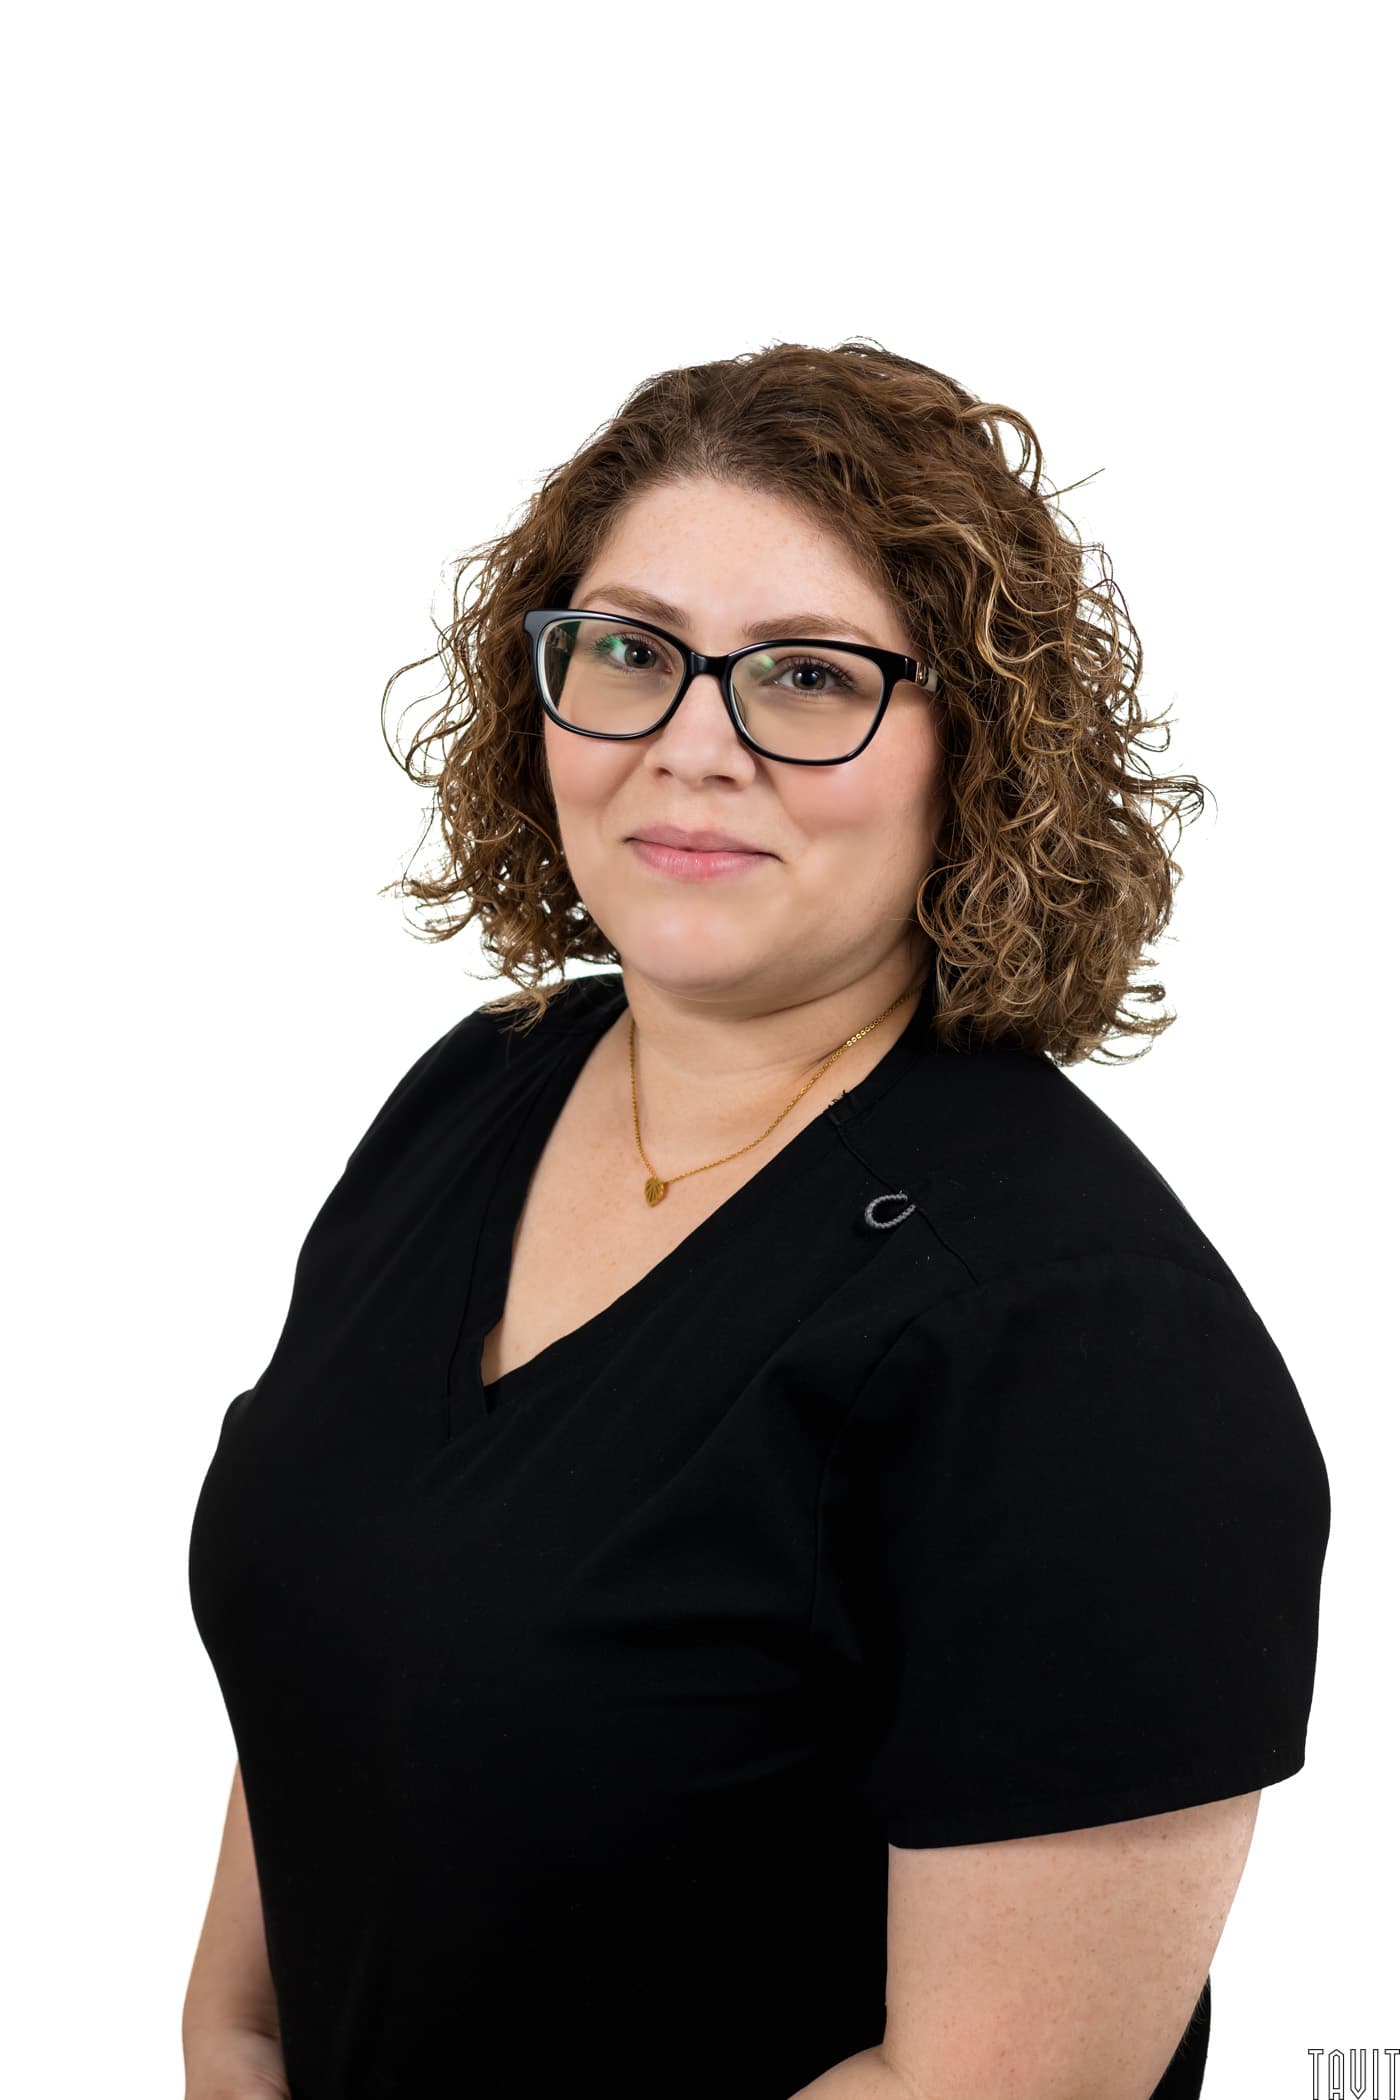 Woman in black shirt and glasses business headshot